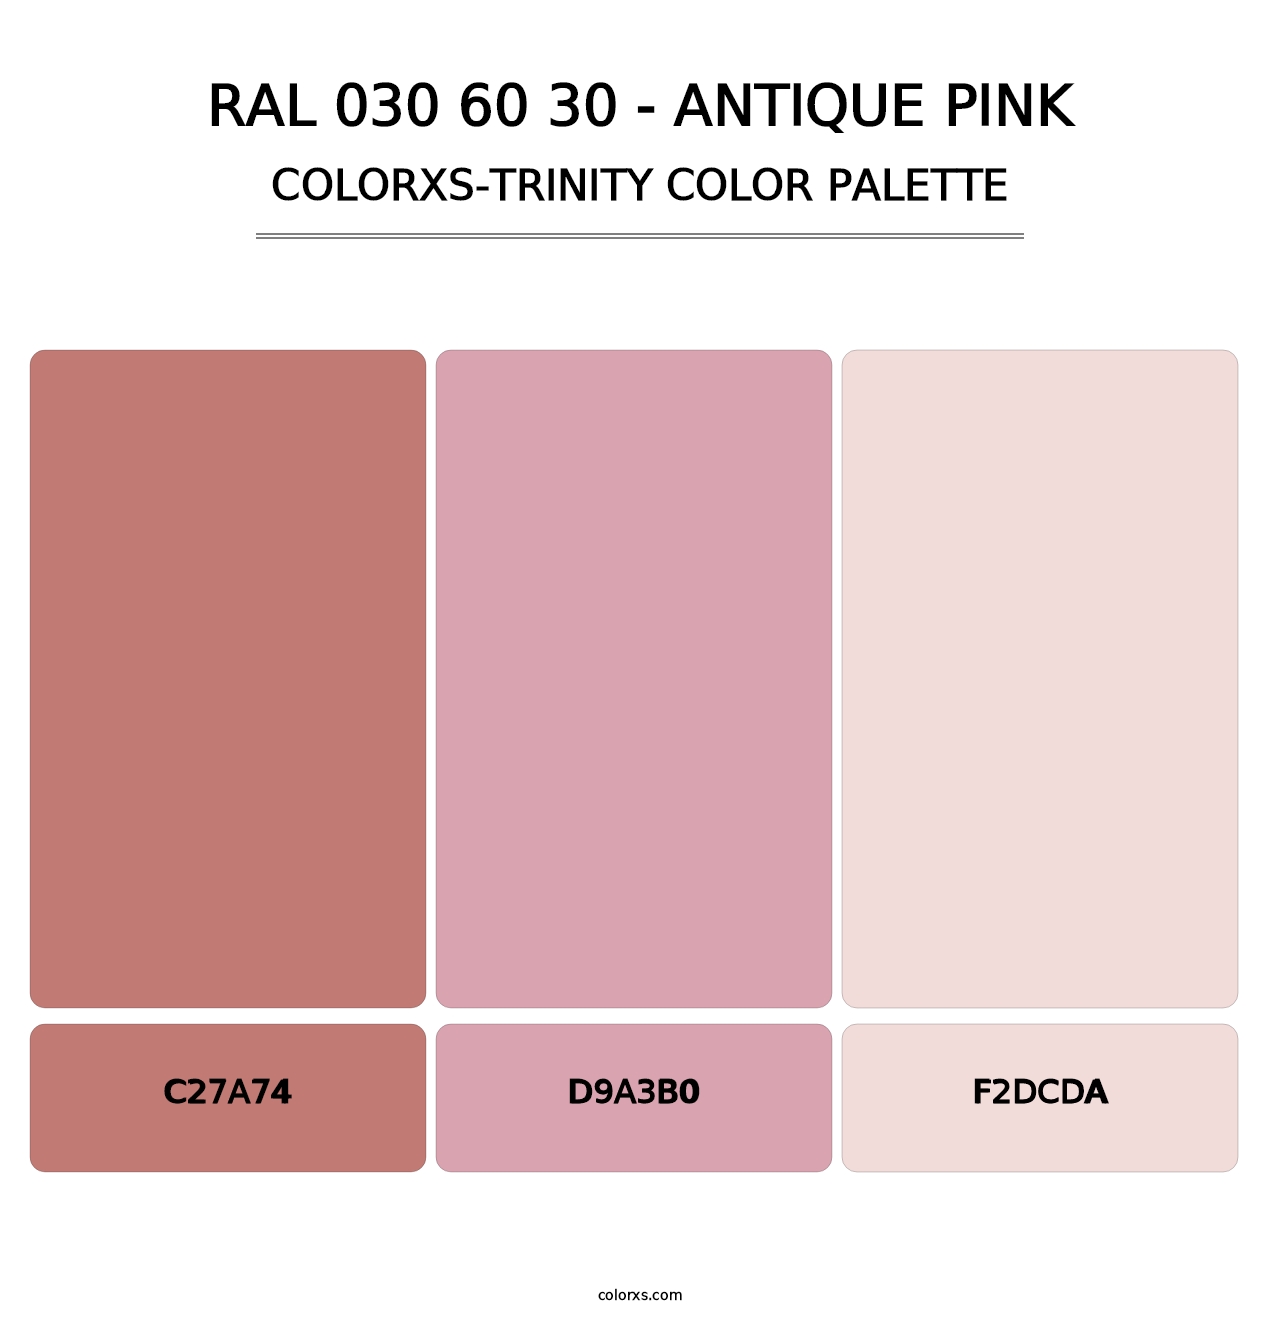 RAL 030 60 30 - Antique Pink - Colorxs Trinity Palette